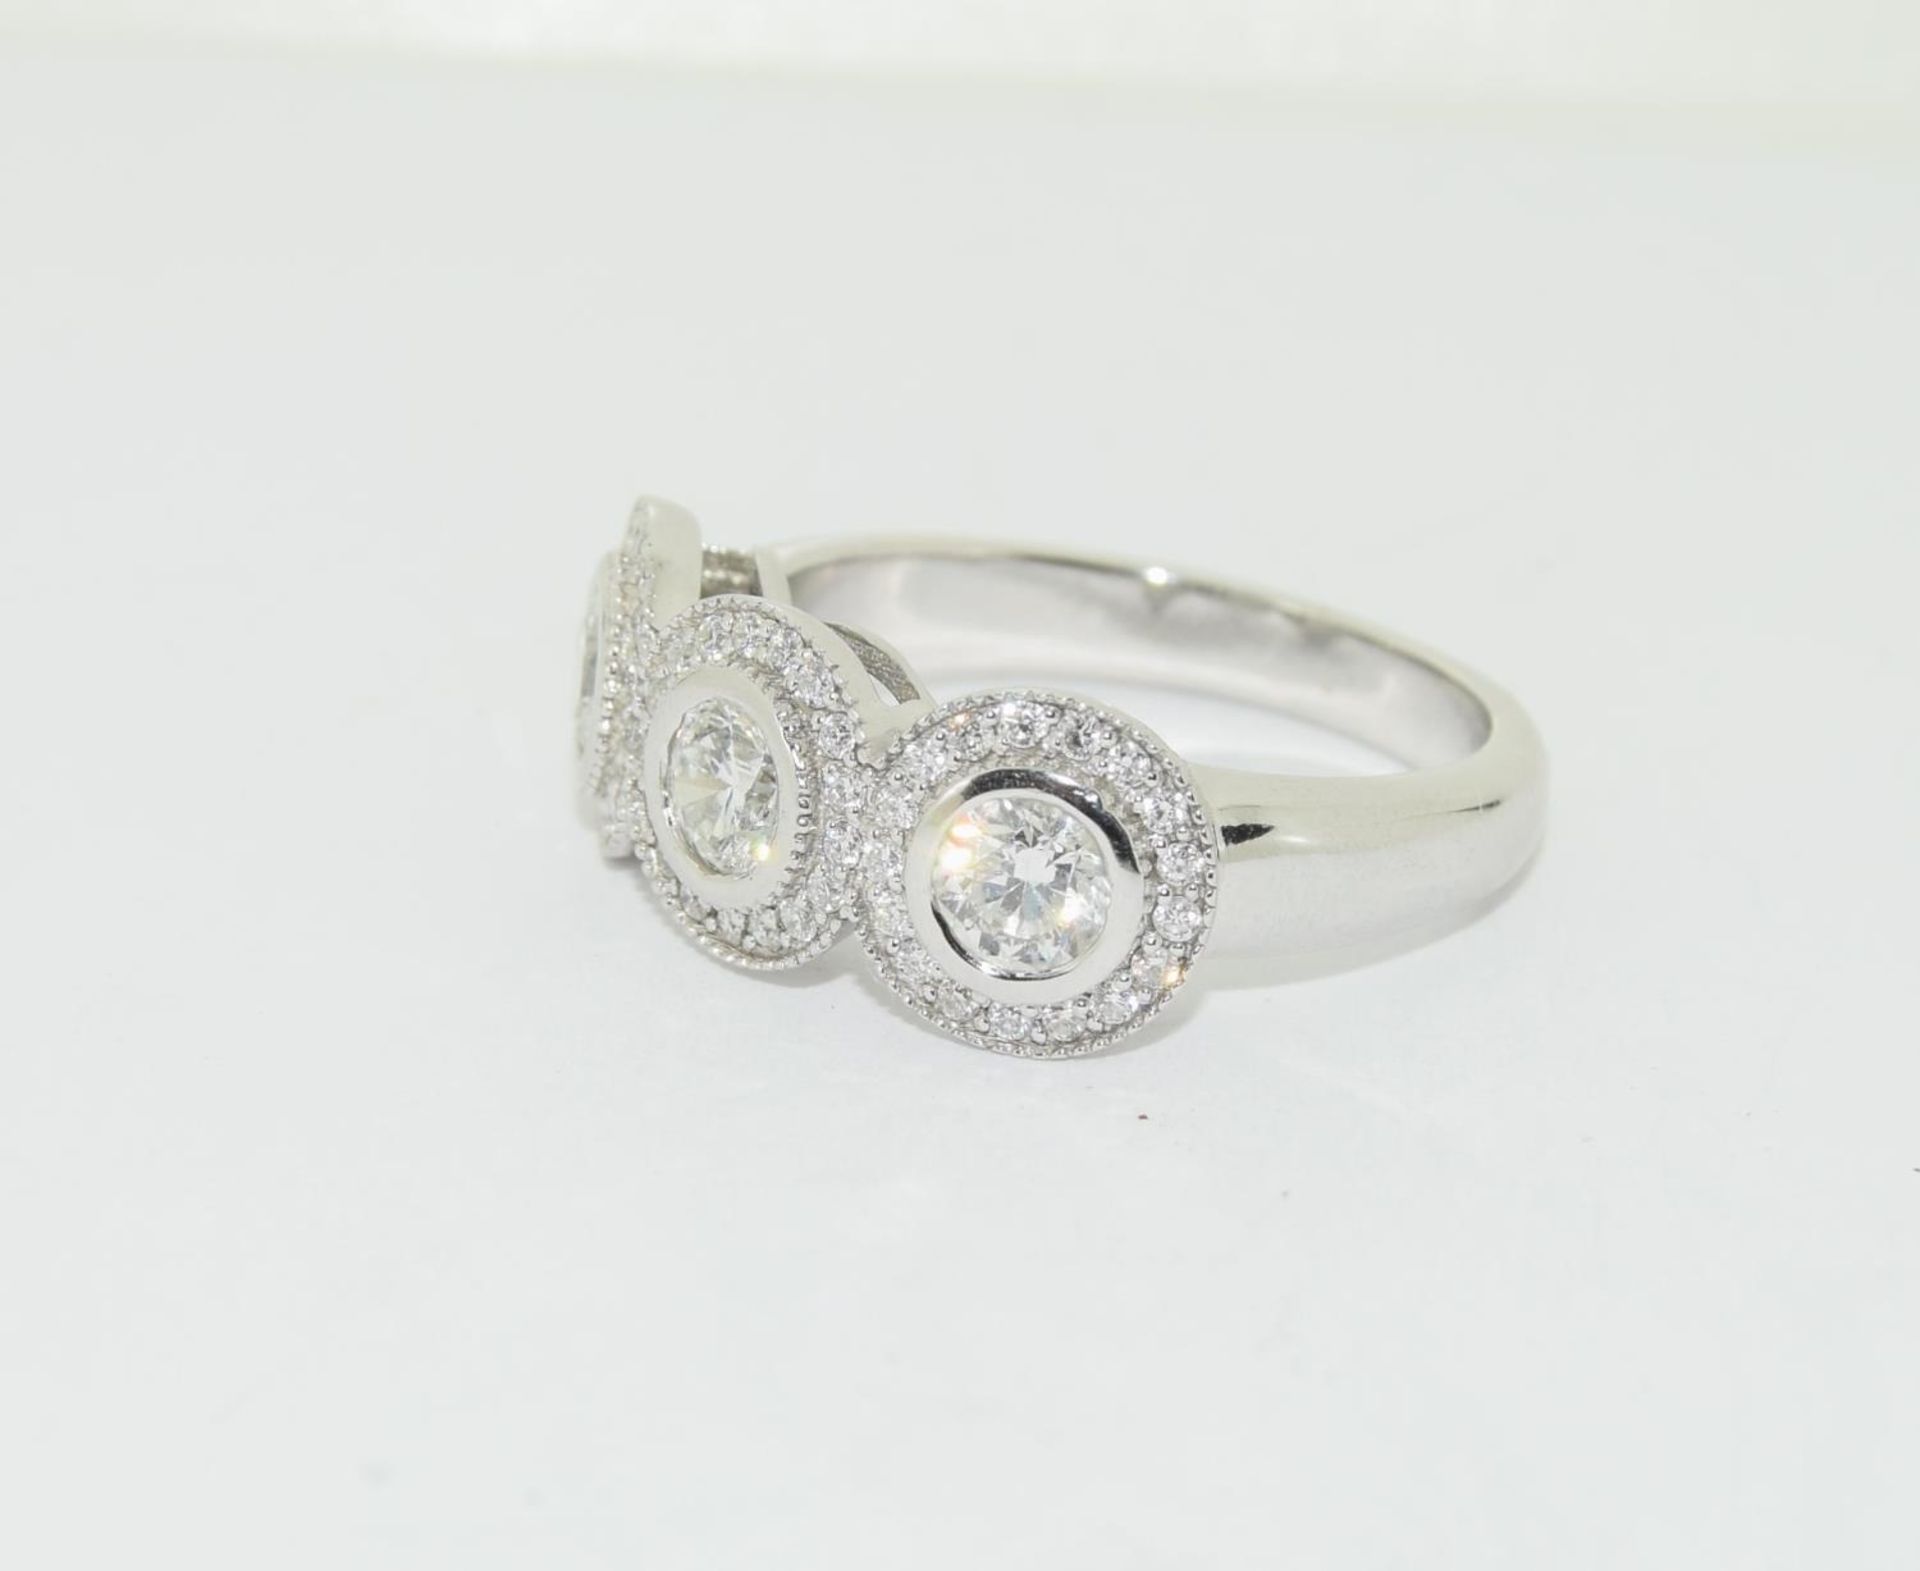 18ct white gold ladies 3 stone diamond "Kissing "ring of approx 1.5ct + size T 9.7gm - Image 4 of 5